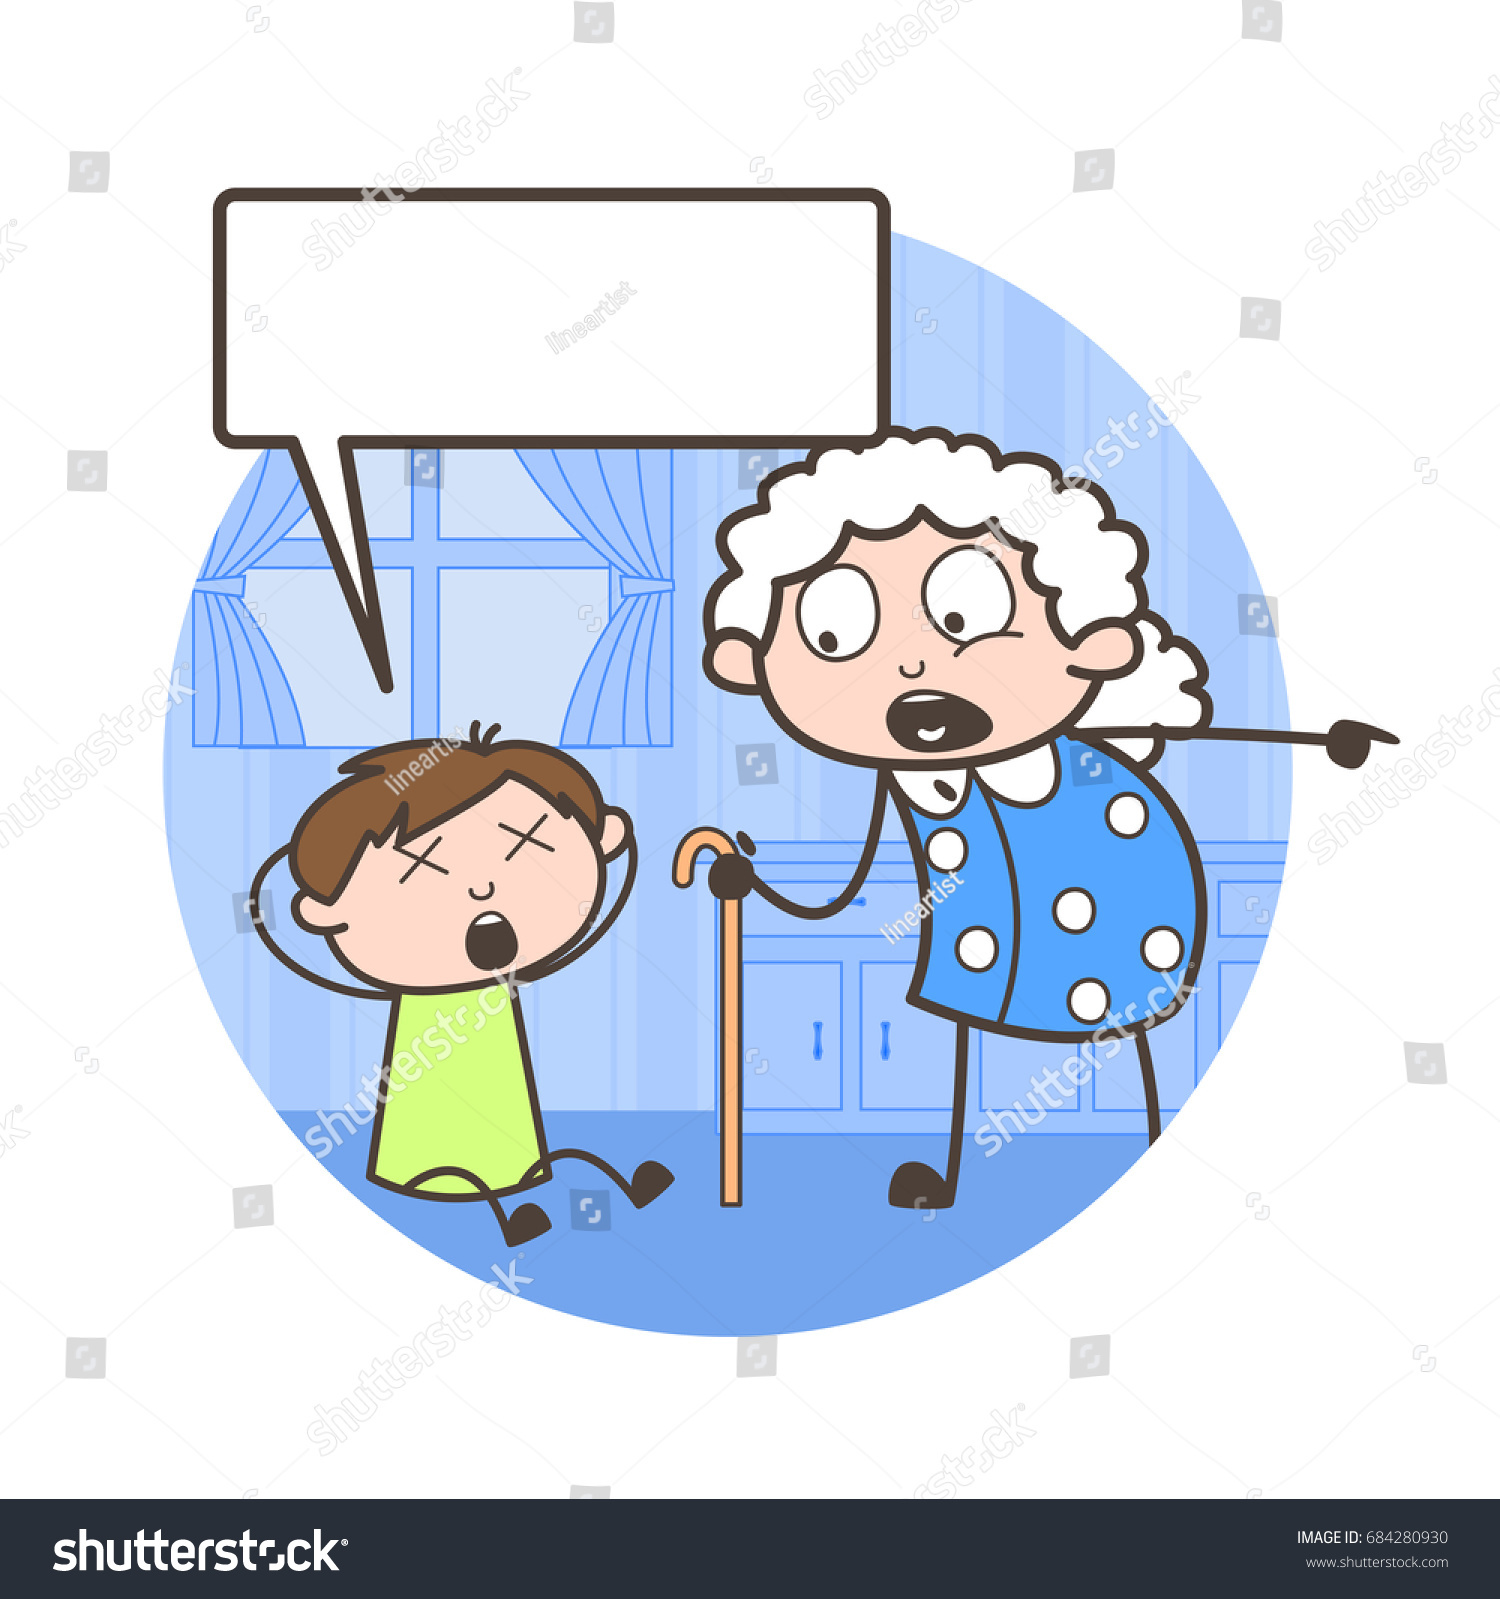 Cartoon Grand Mother Scolding Her Grandson Stock Vector Royalty Free 684280930 